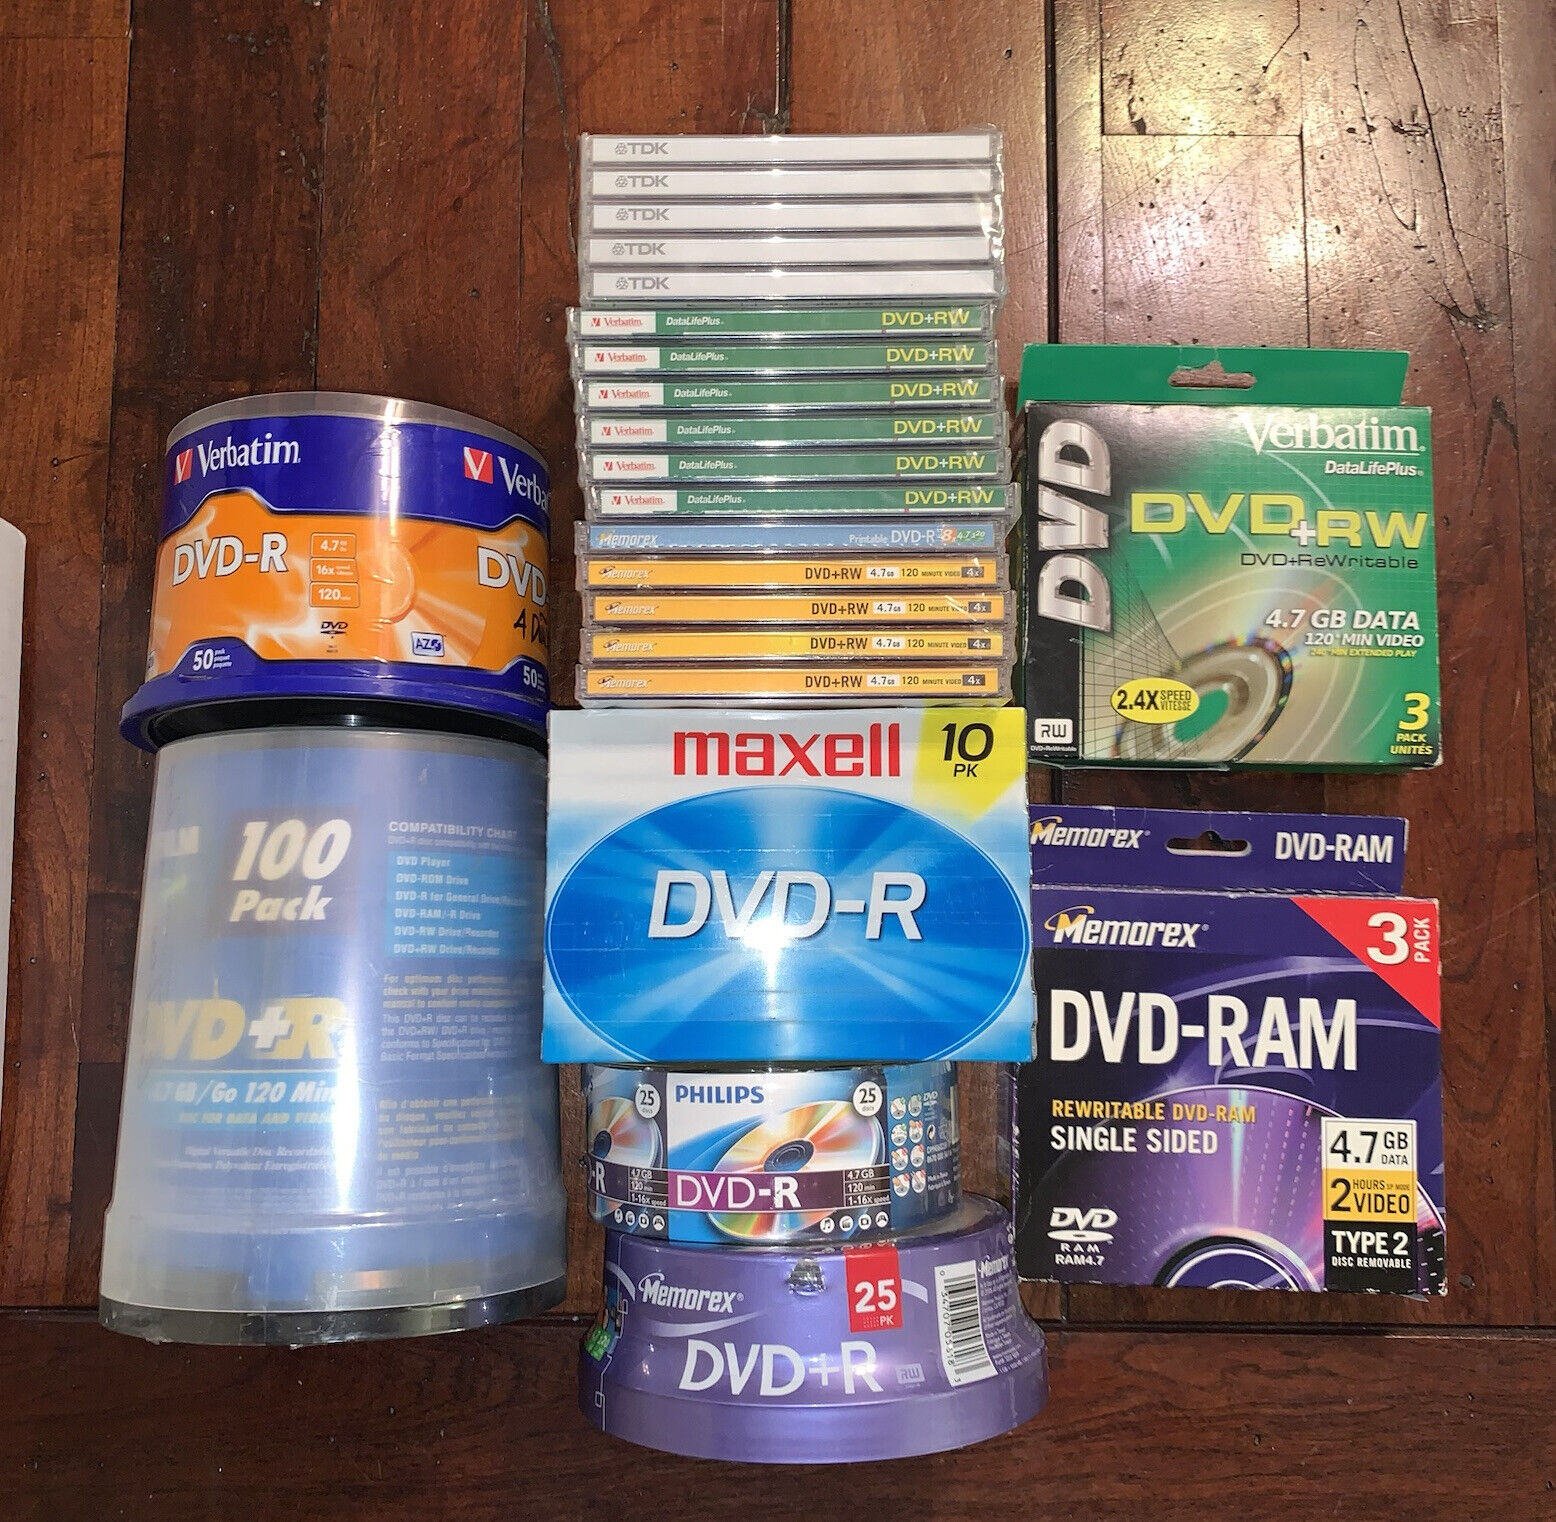 Huge Lot of 232 NEW Recordable Blank DVDs Discs DVD-R DVD+R DVD+RW Philips TDK